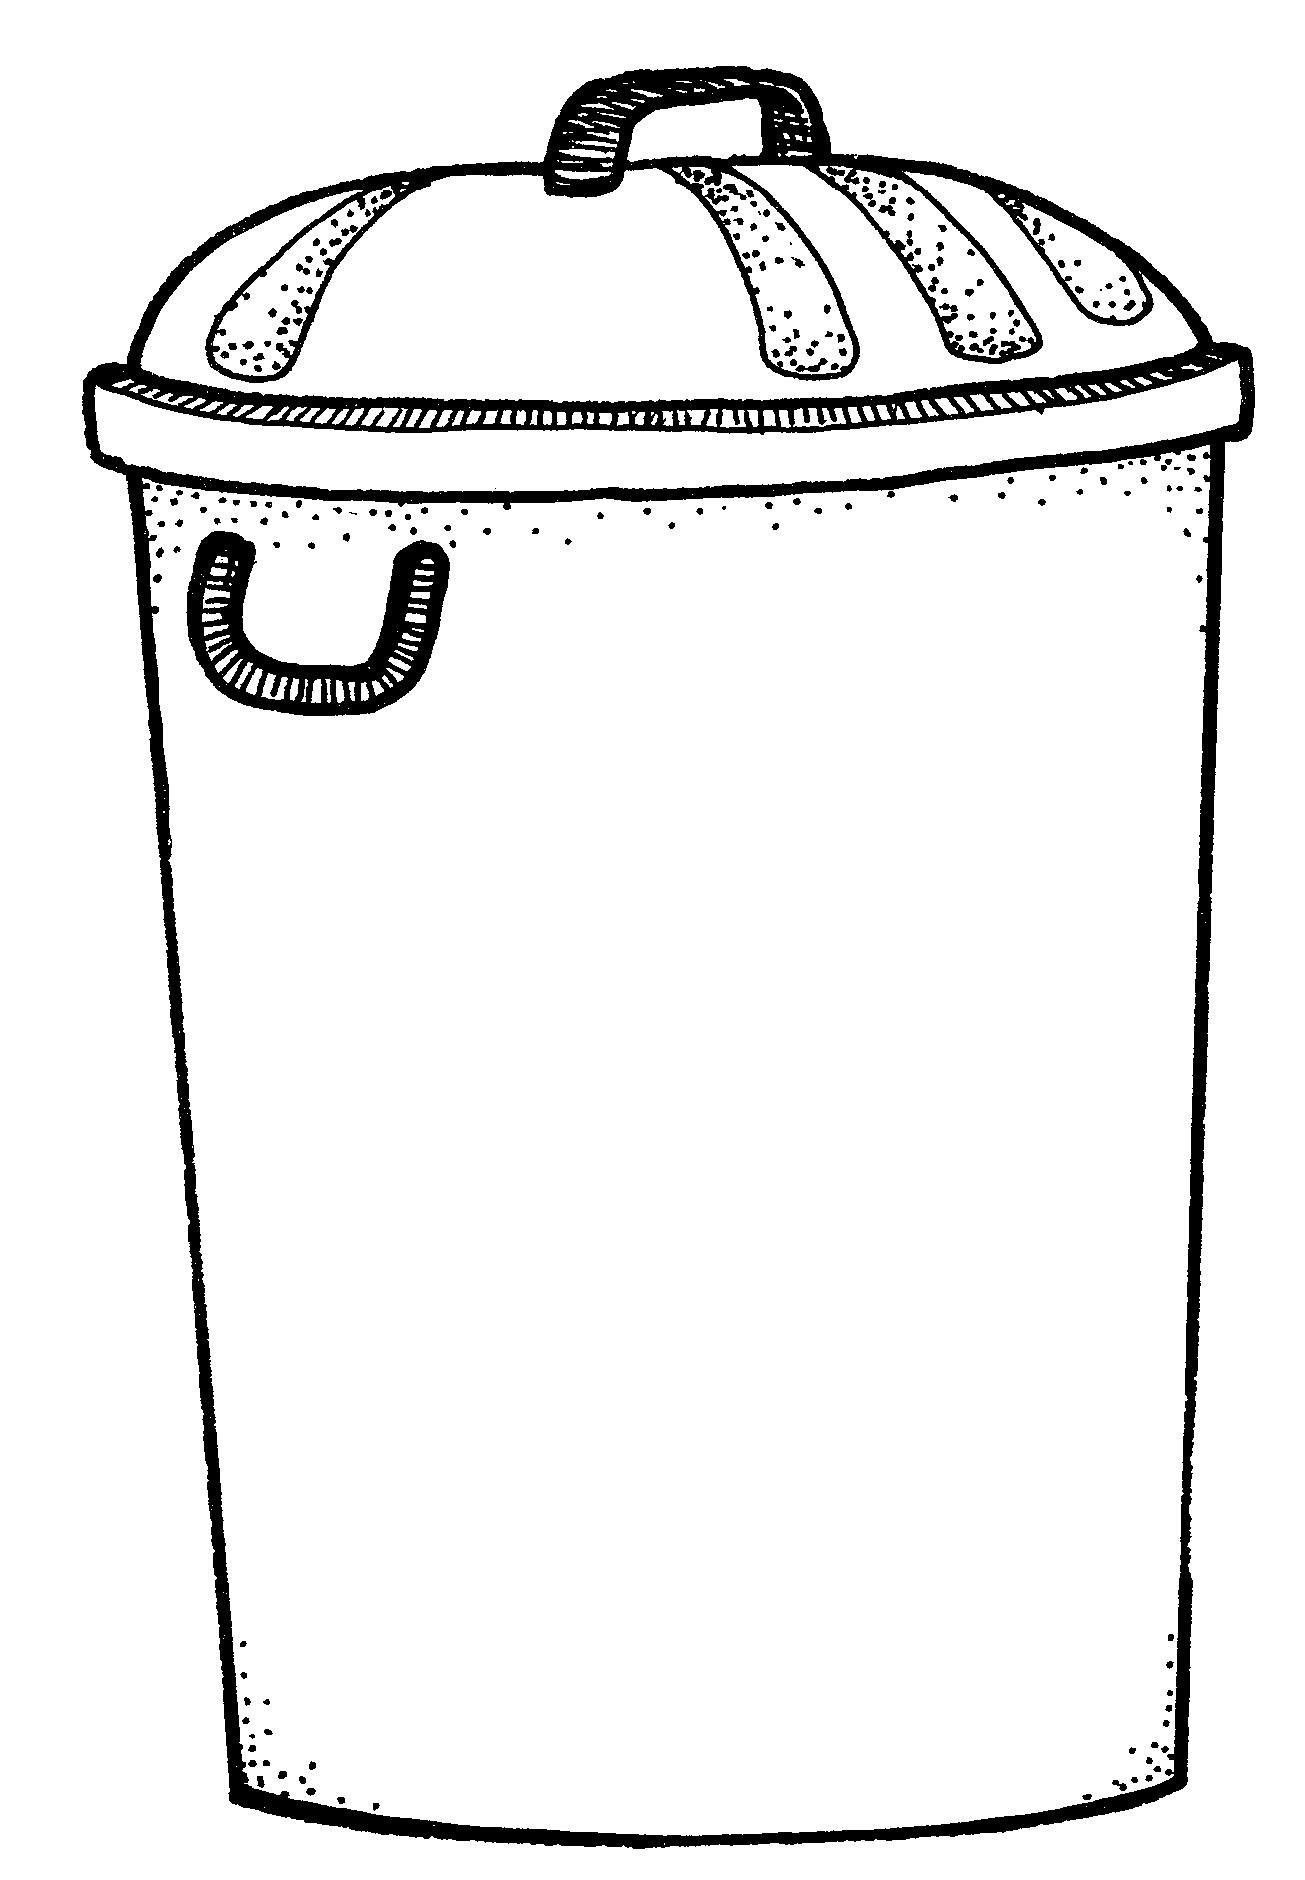 Garbage Can Clip Art - ClipArt Best